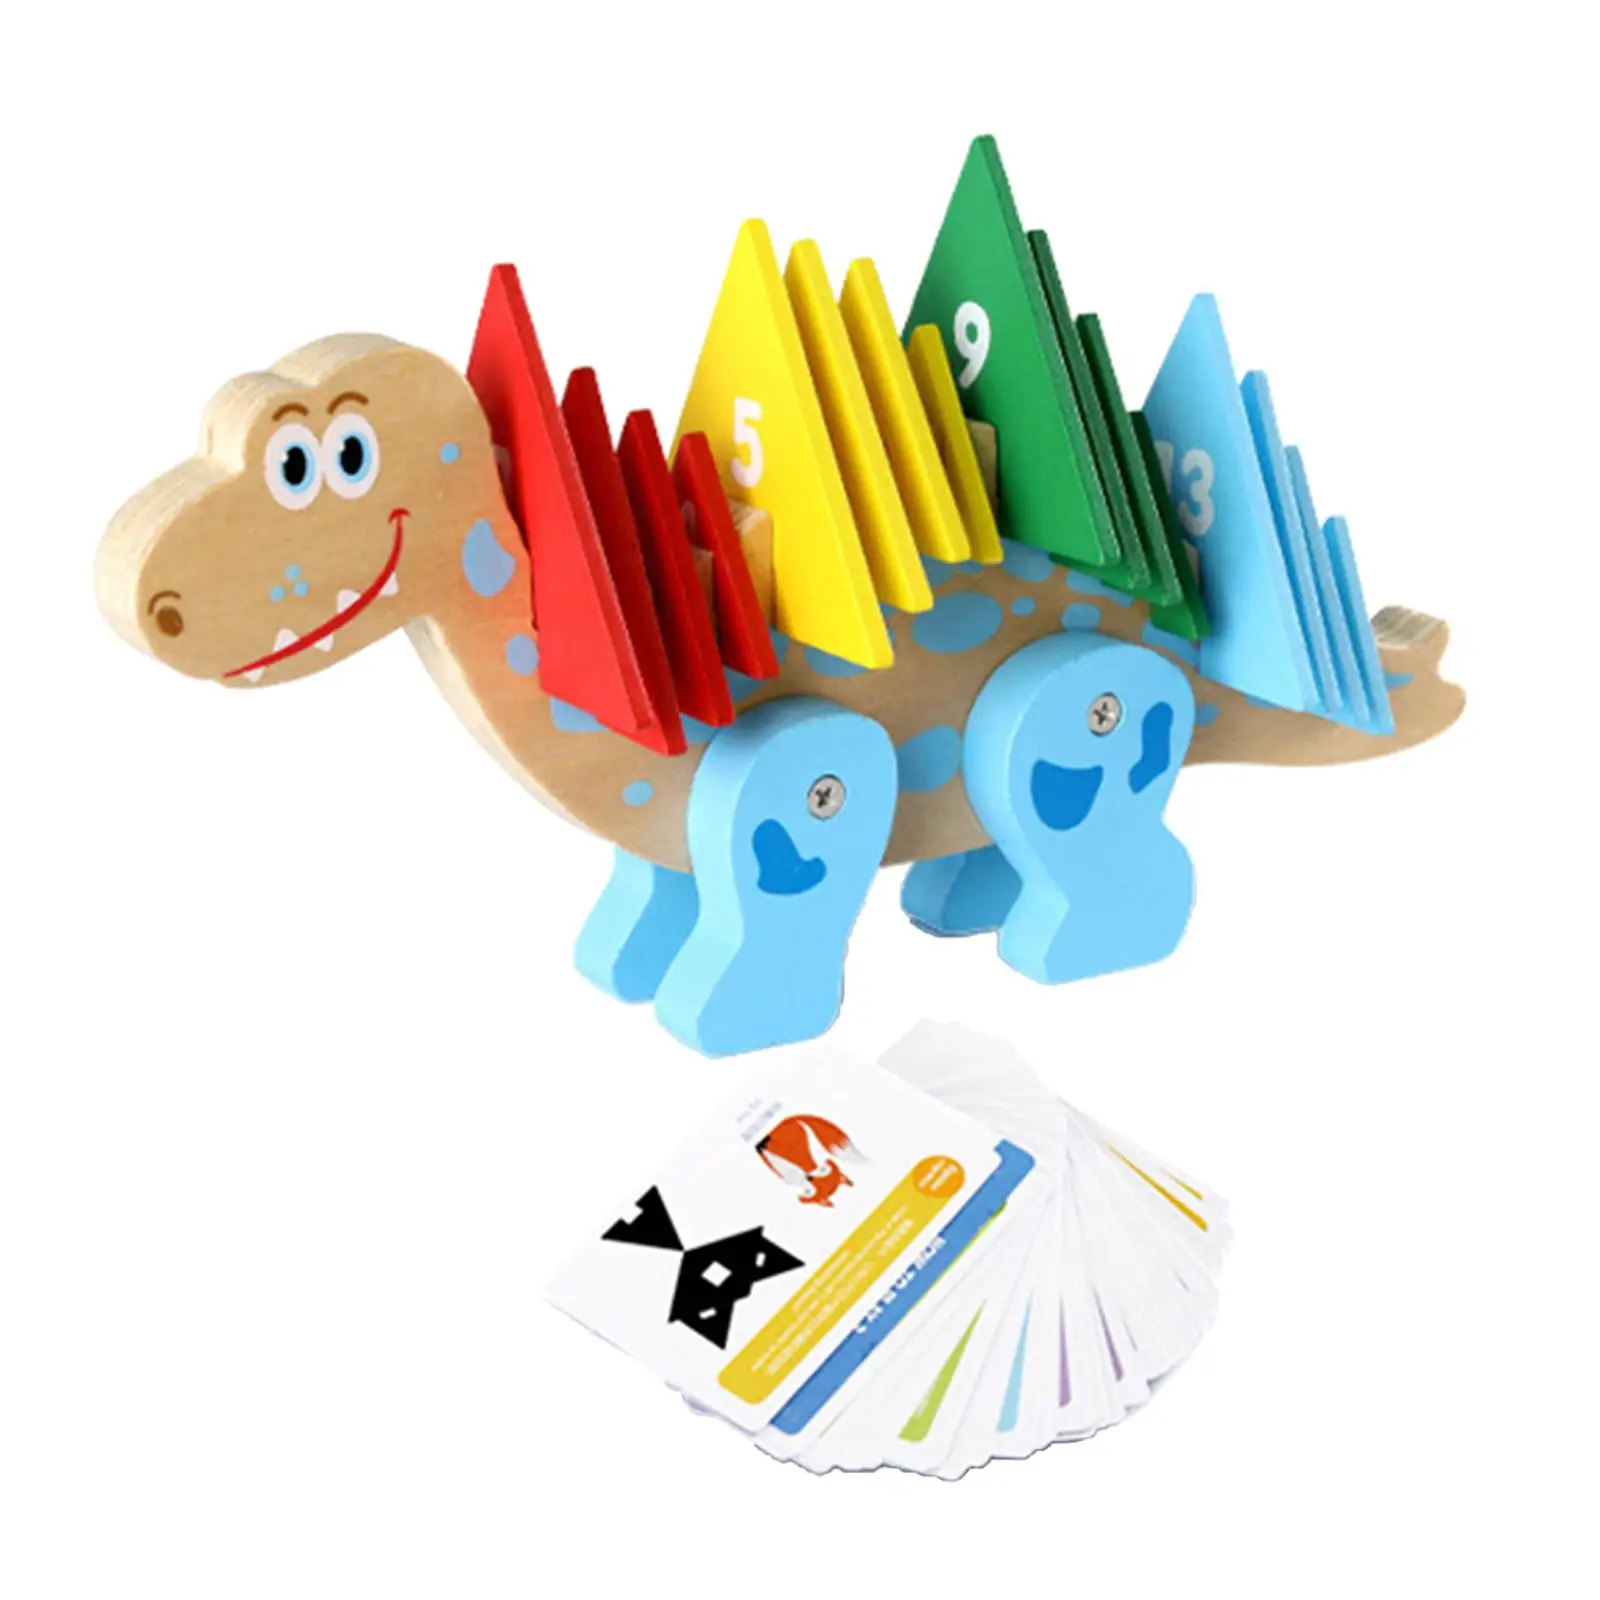 Kids Math Toy Dinosaur Toy Logical Thinking Educational Toys Adorable Lightweight Math Learning Toy for Preschool Living Room